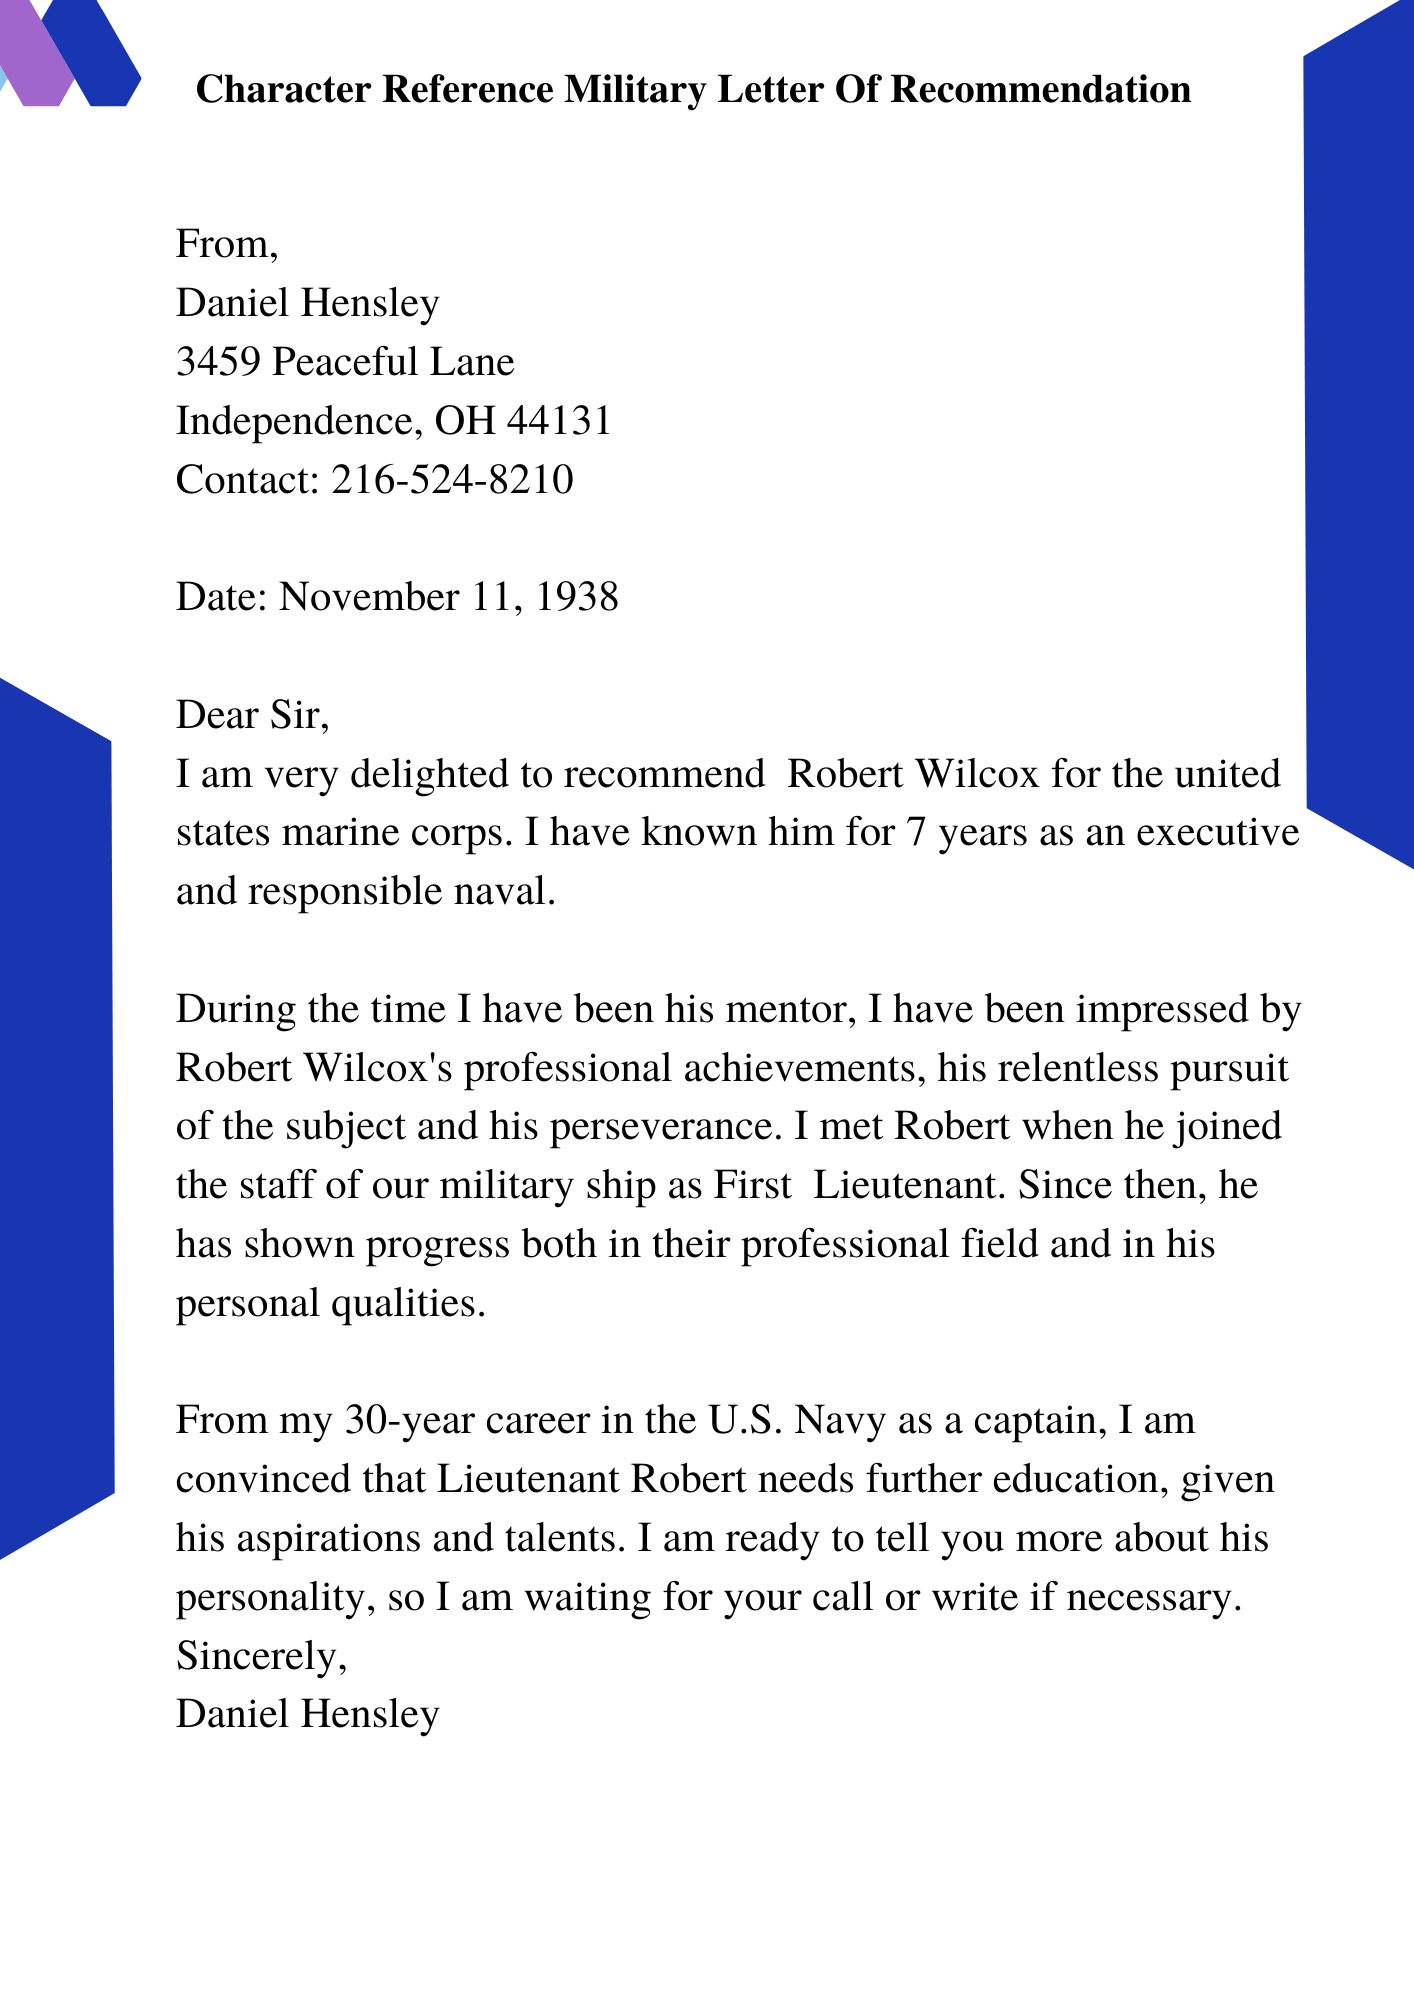 Character Reference Military Letter Of Recommendation 